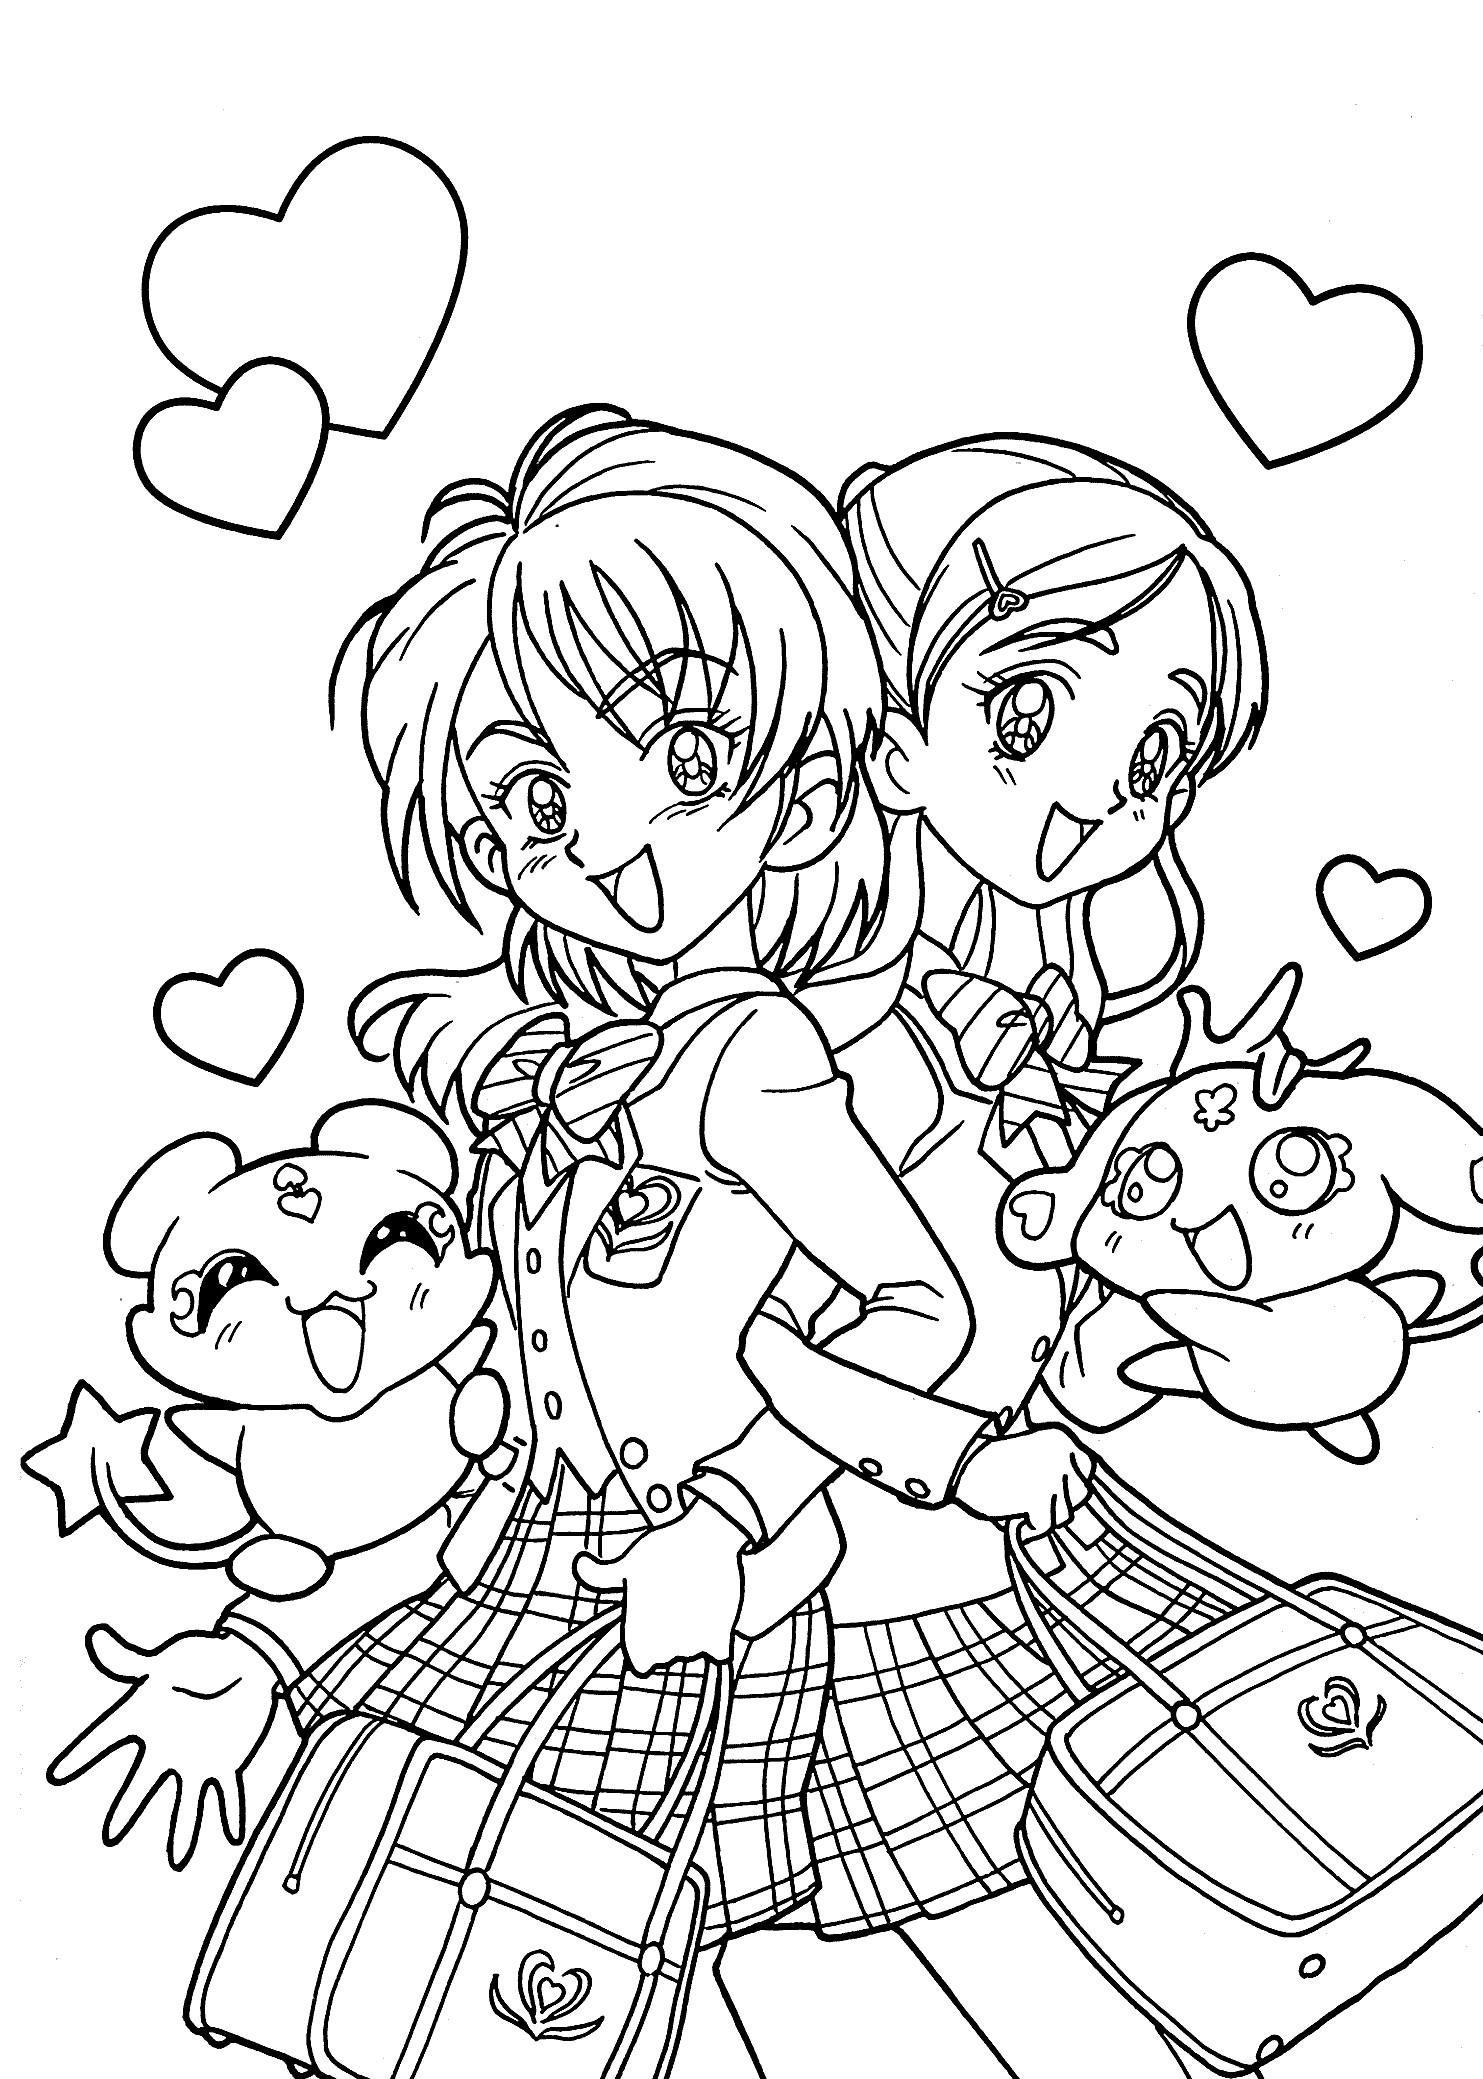 Easy Anime Coloring Pages For Kids
 Manga Coloring Pages Bestofcoloring